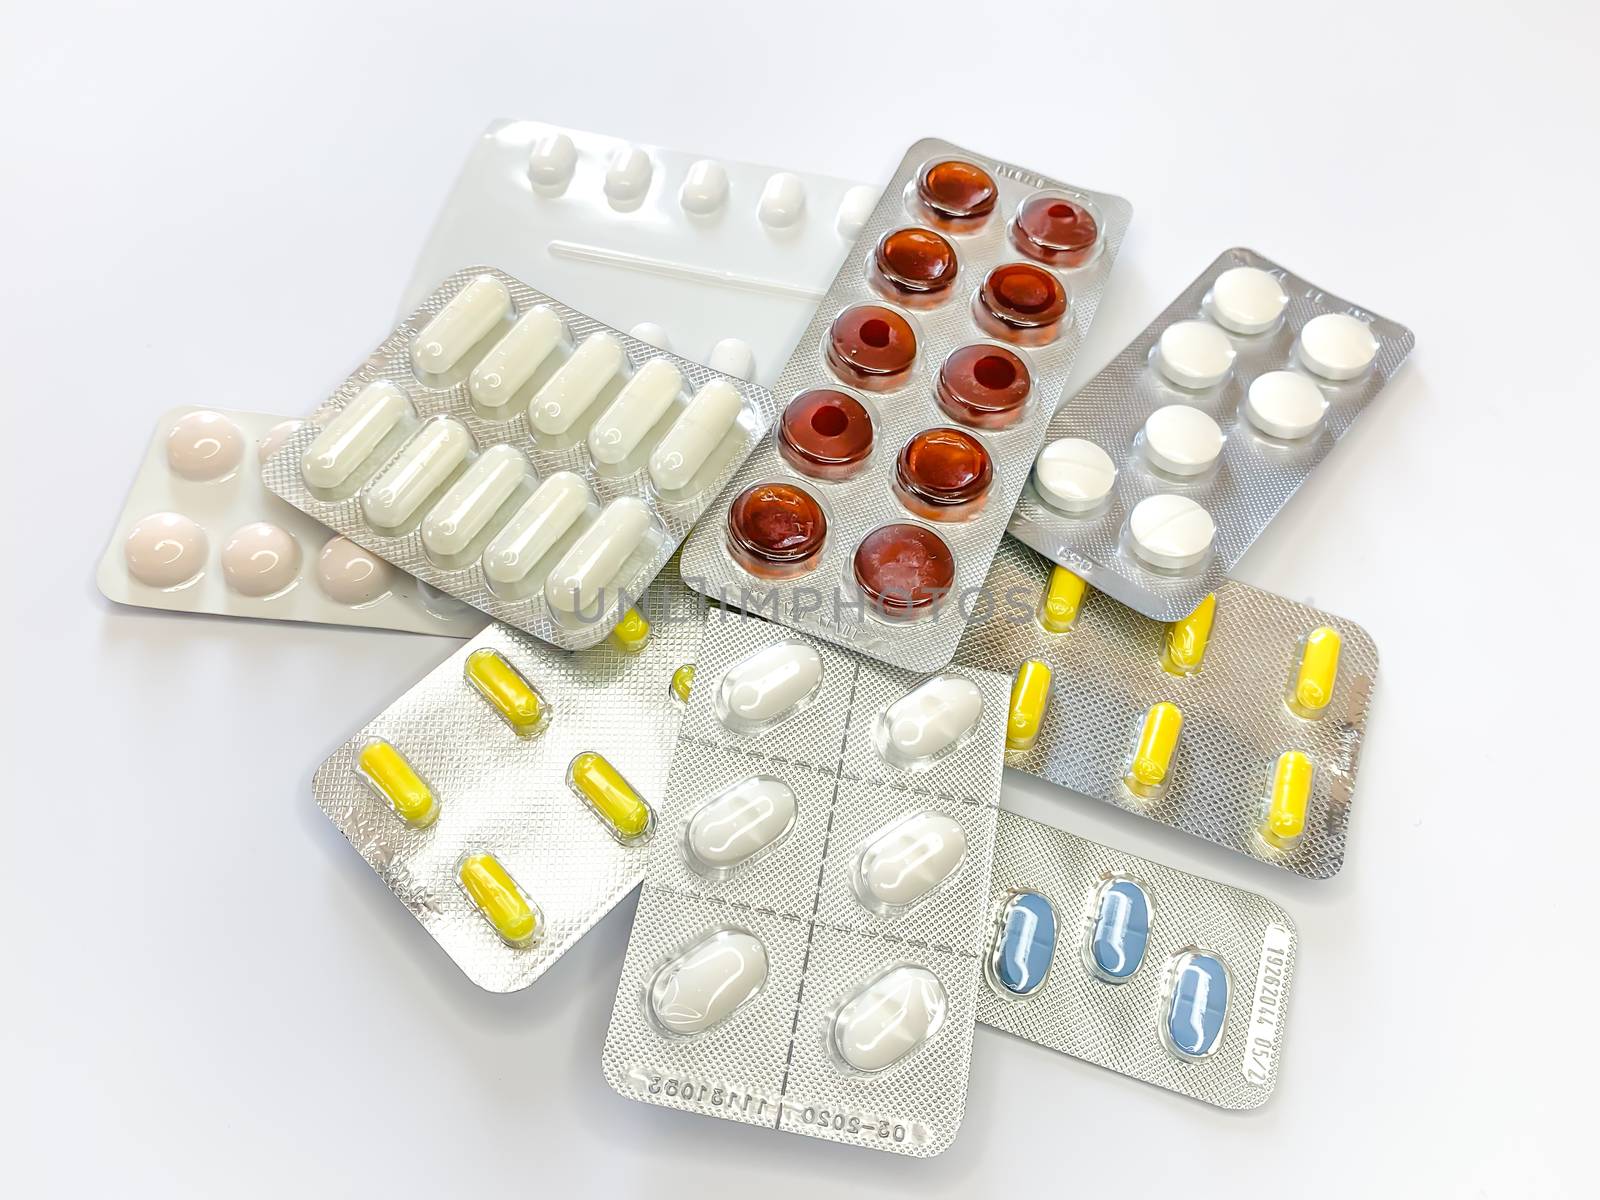 Many plenty a lot of tablets in blister pack, pills, capsules on a white background. Horizontal image